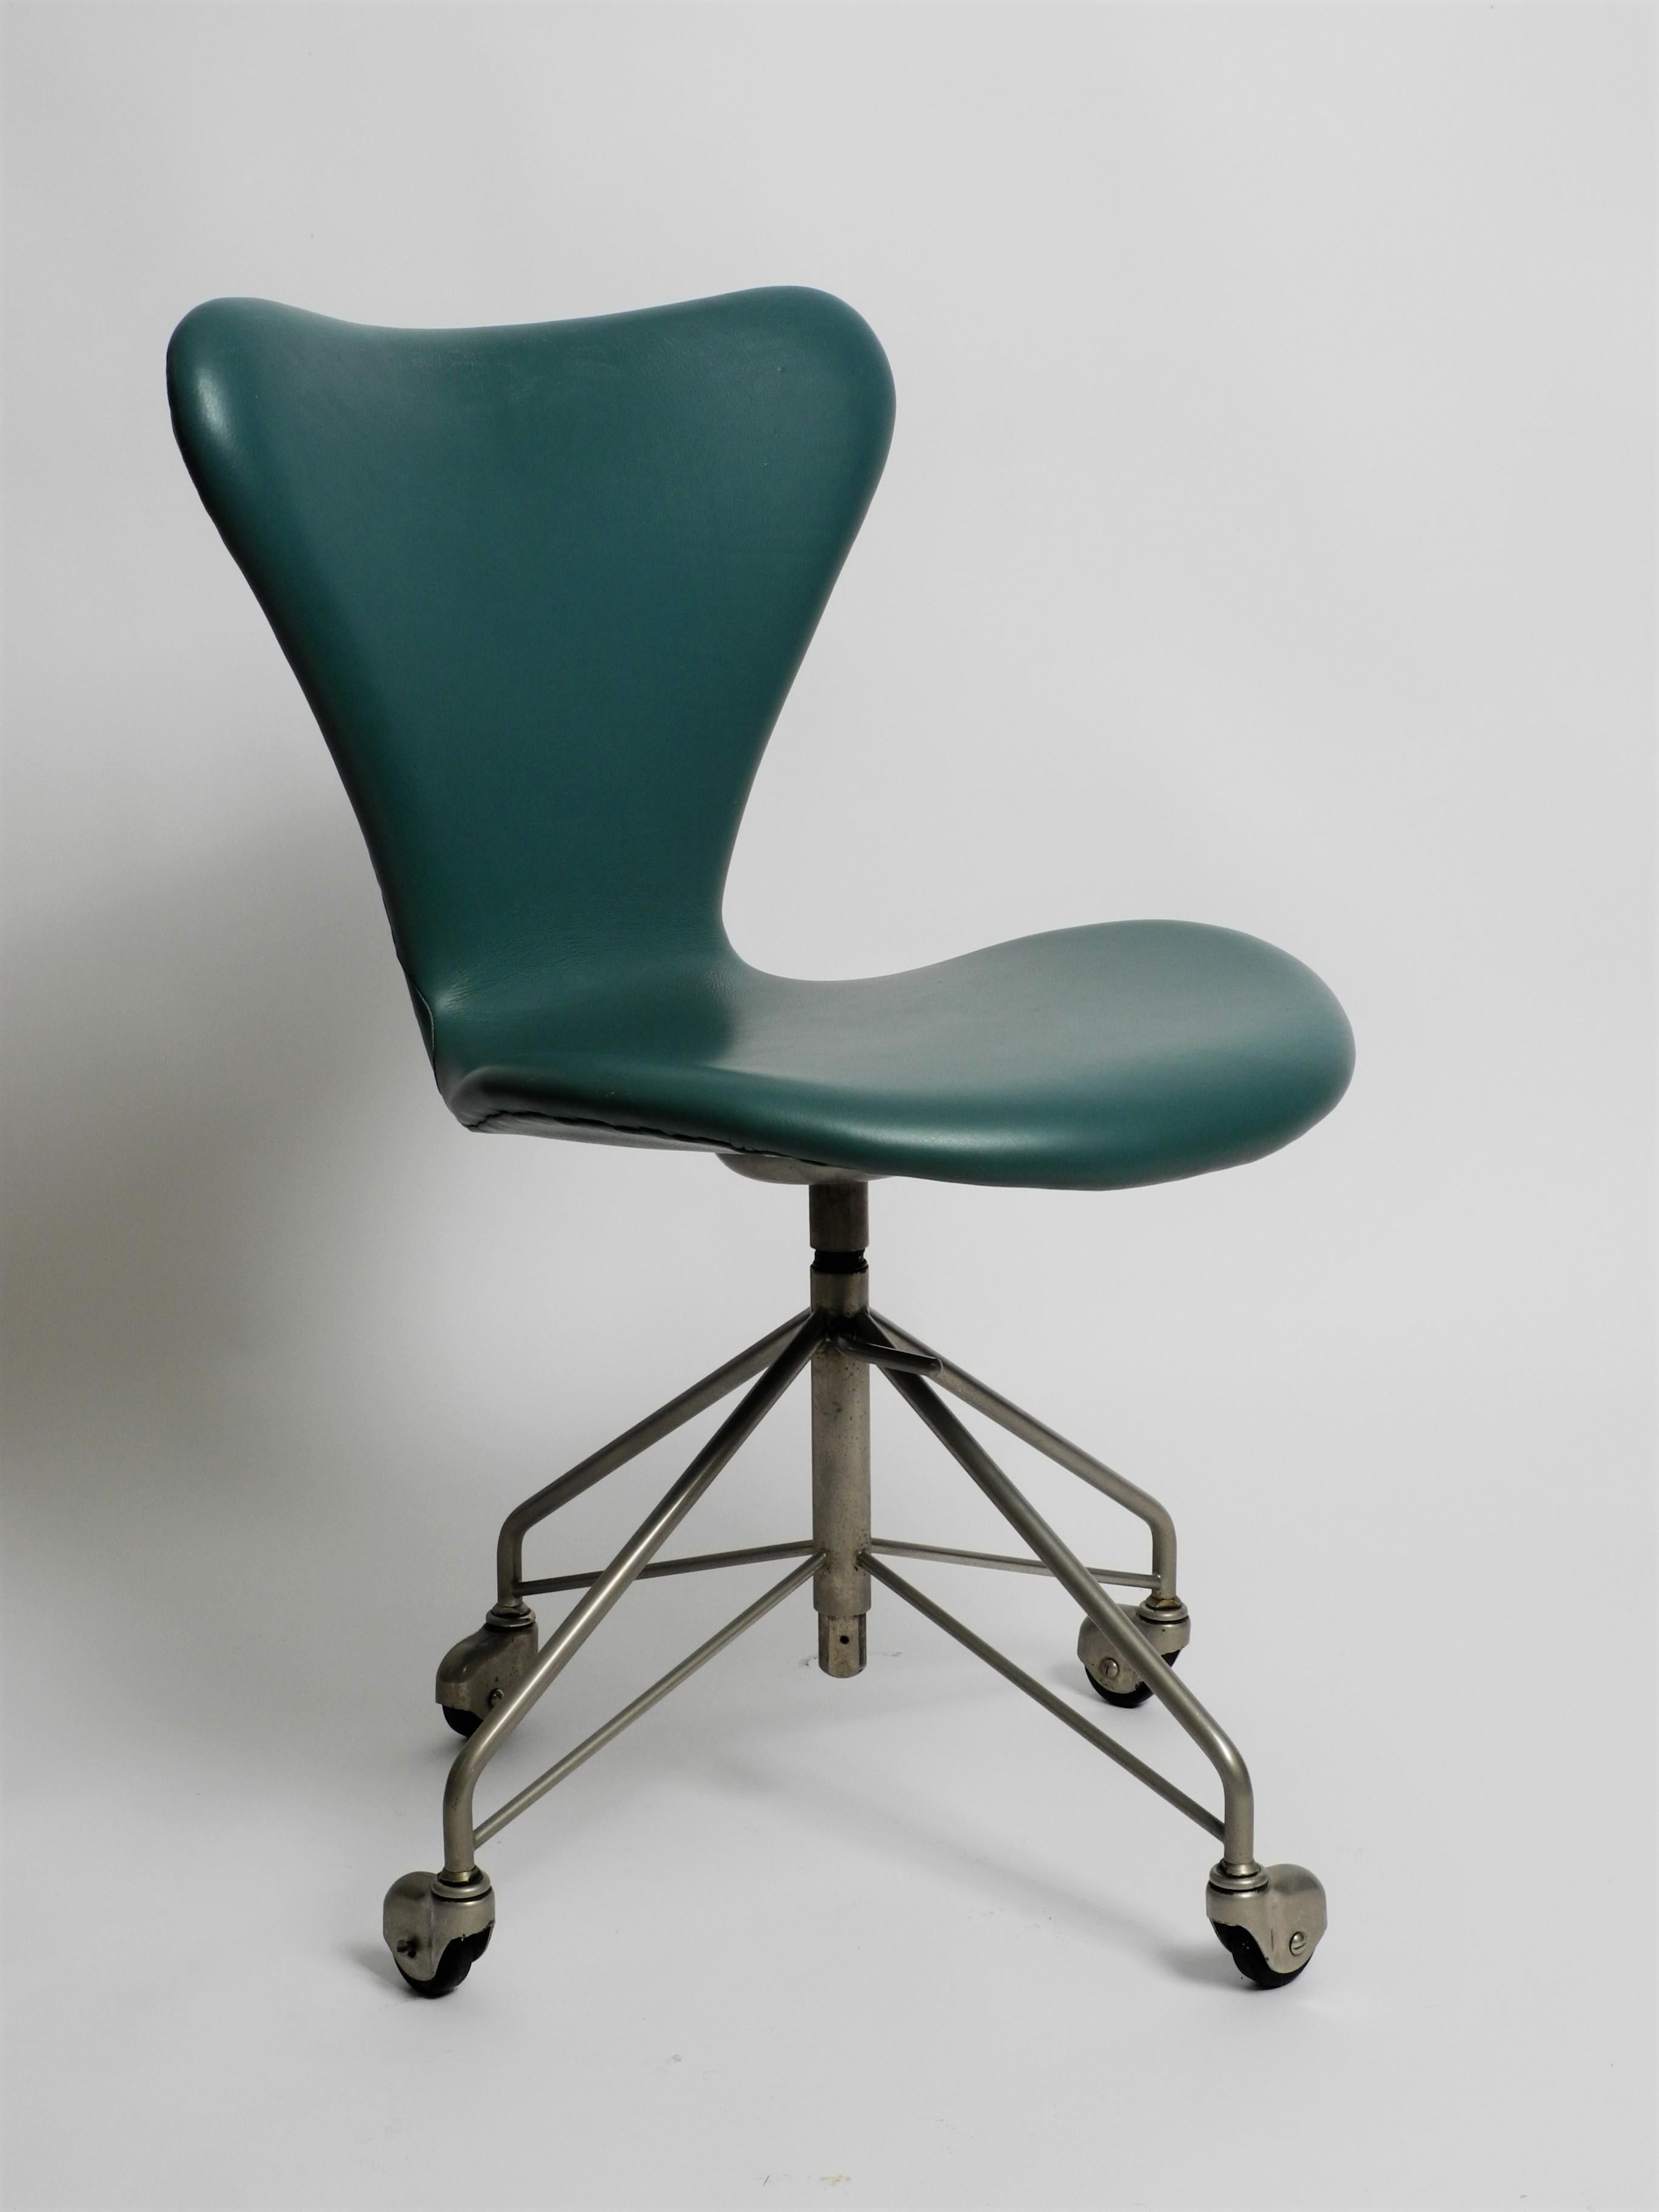 Danish Early Arne Jacobsen 3117 Office Chair by Fritz Hansen Turqouise Faux Leather For Sale